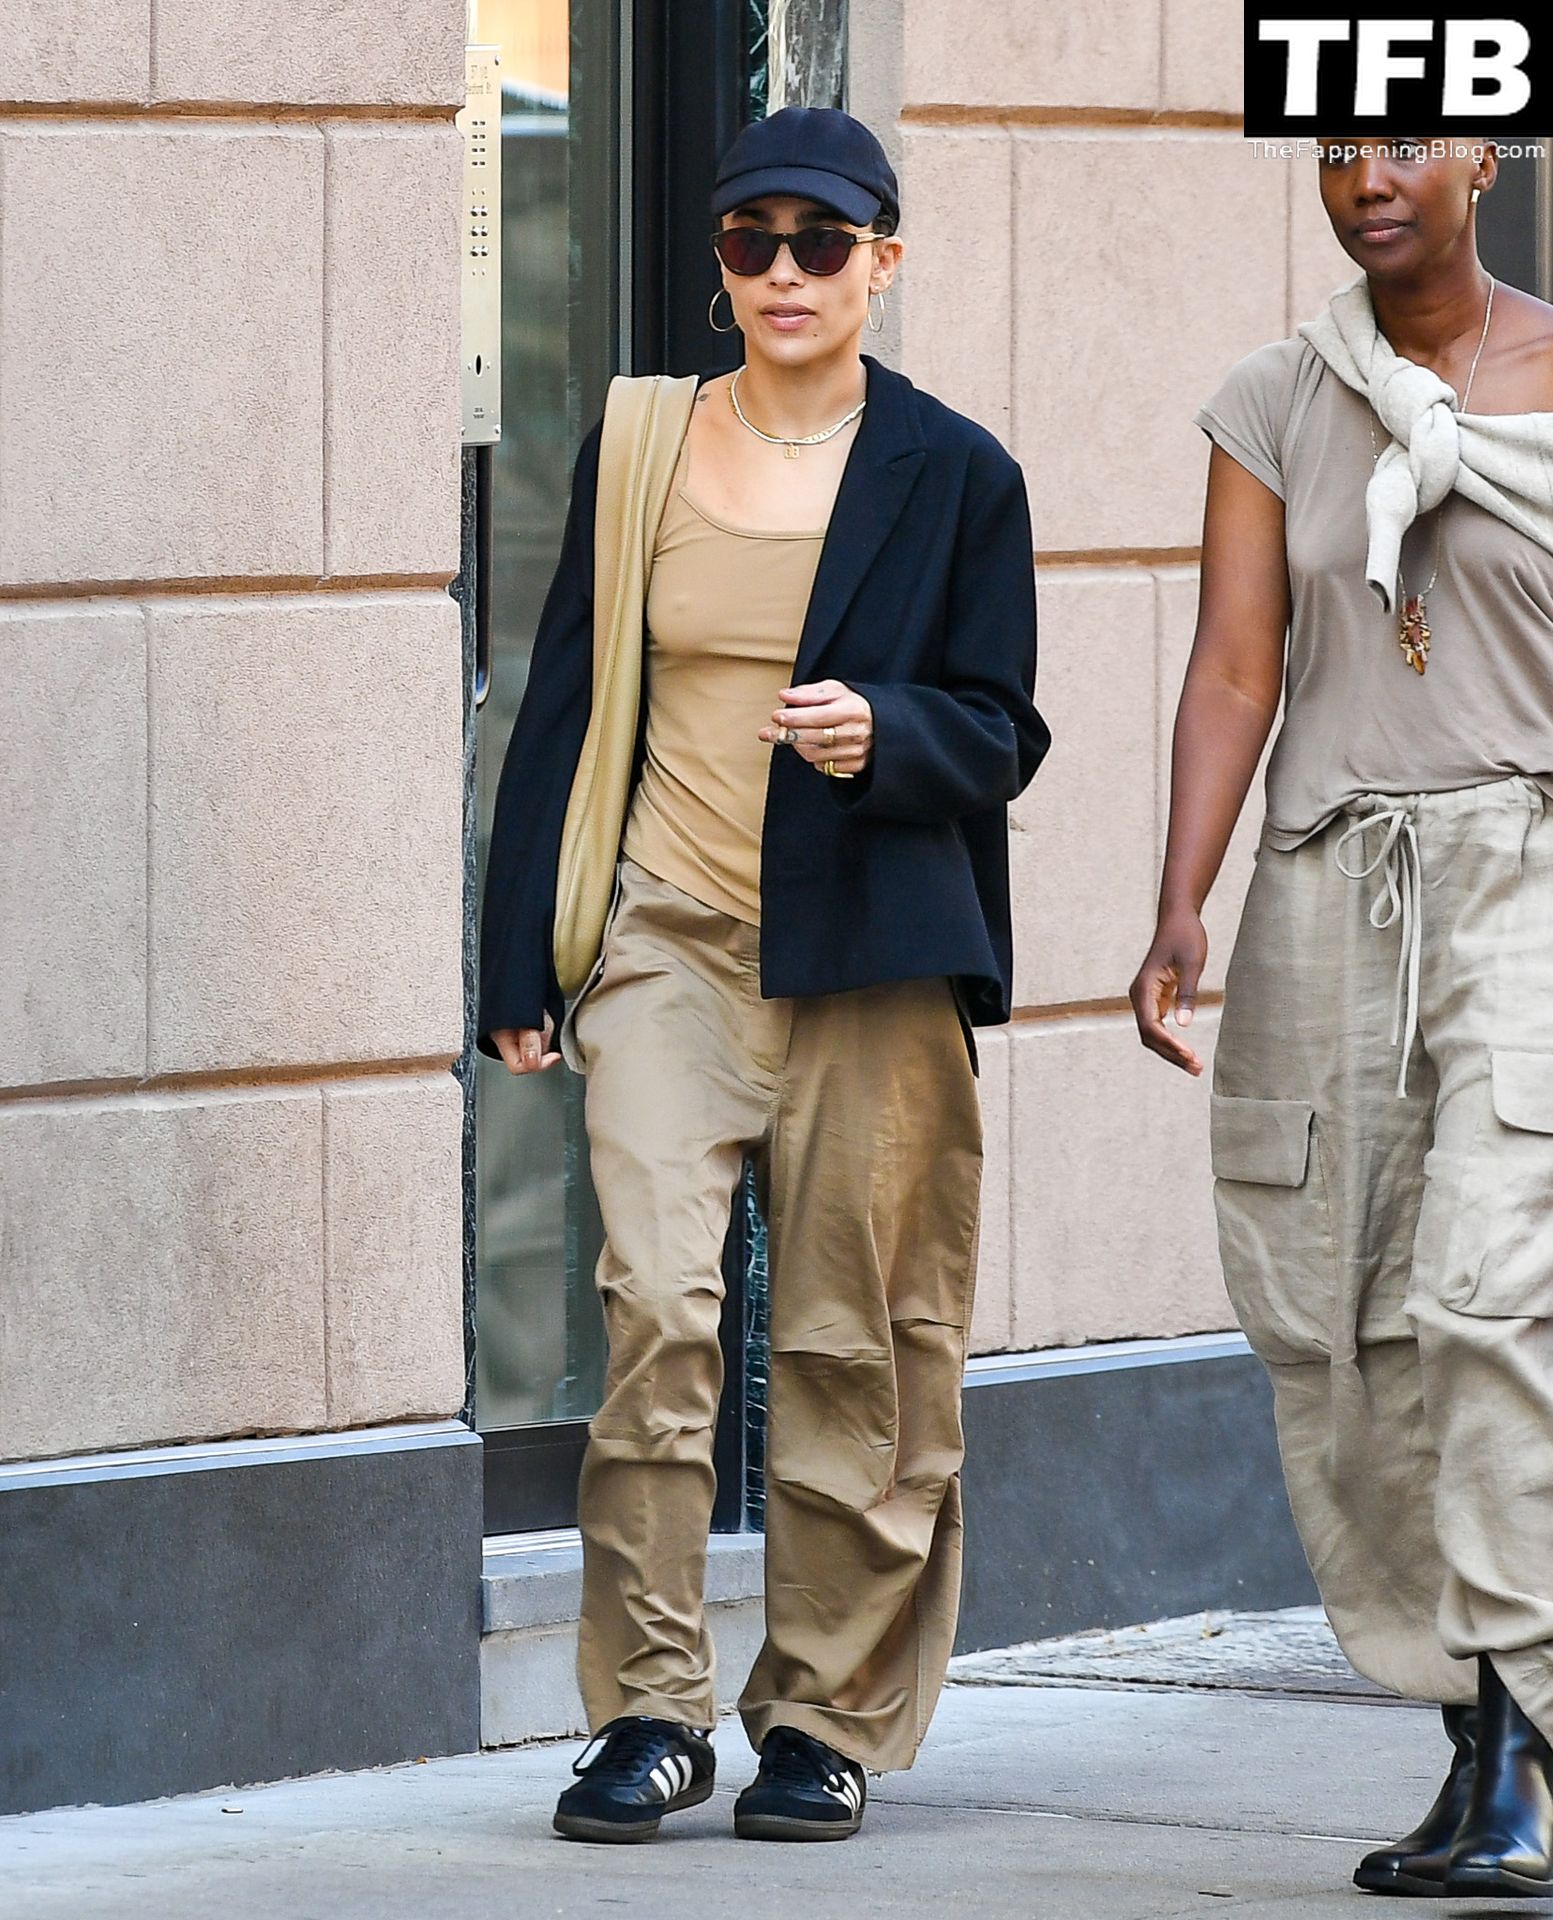 Zoe Kravitz Sexy Tits The Fappening Blog 5 - Braless Zoe Kravitz Steps Out With a Friend in NYC (13 Photos)